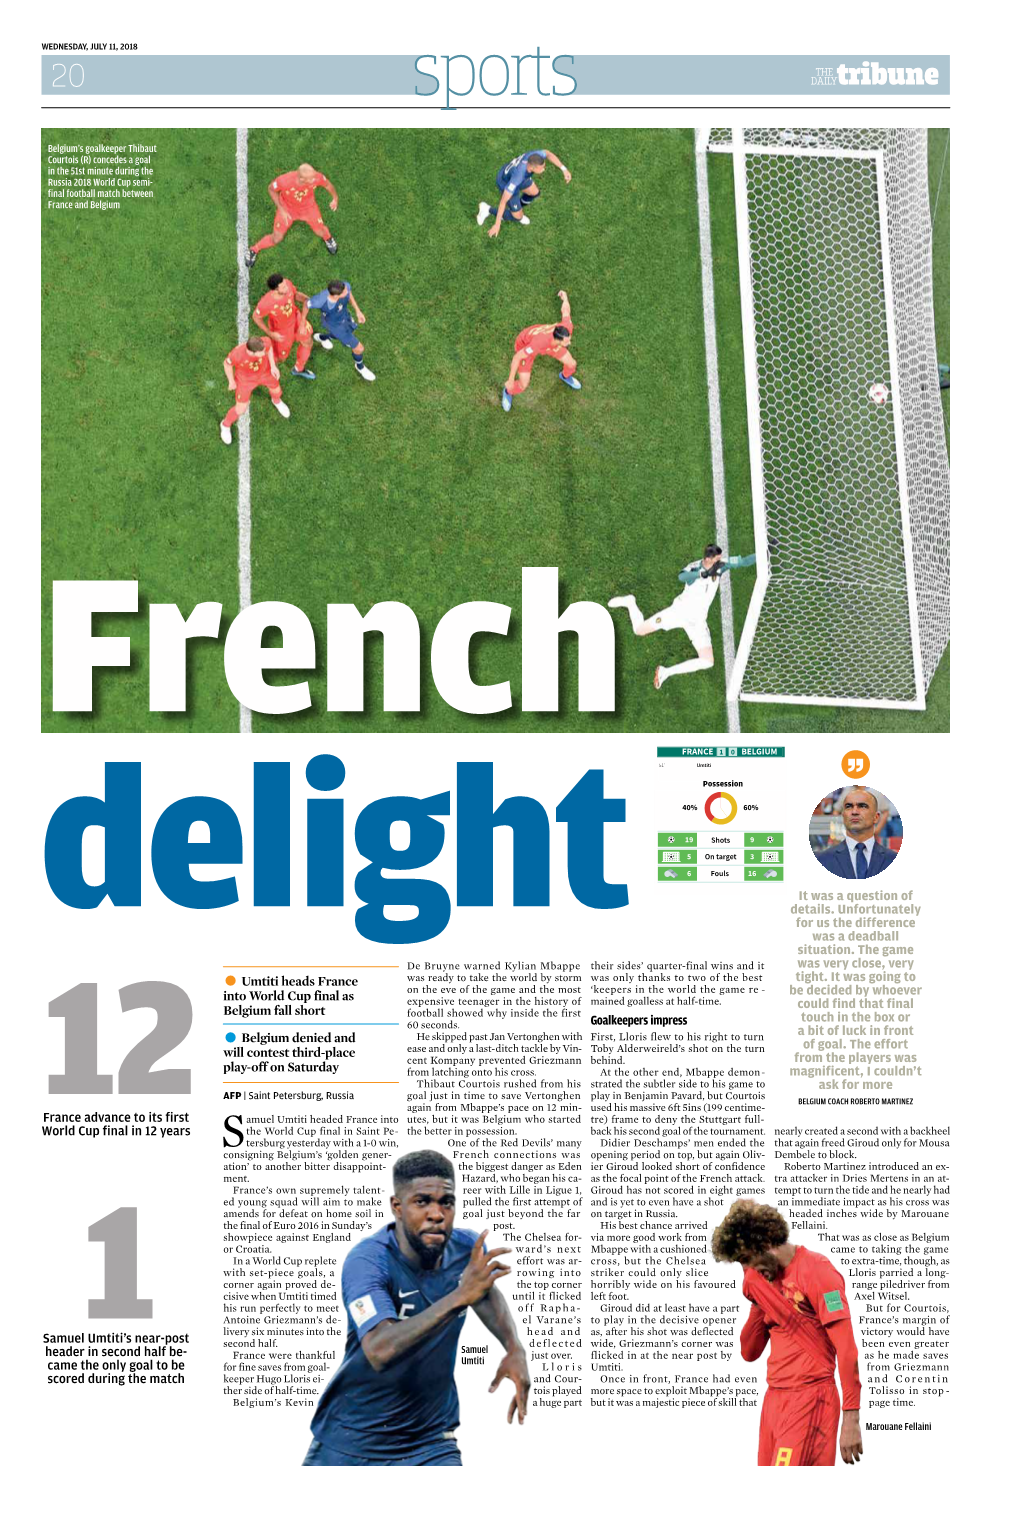 • Umtiti Heads France Into World Cup Final As Belgium Fall Short • Belgium Denied and Will Contest Third-Place Play-Off on S